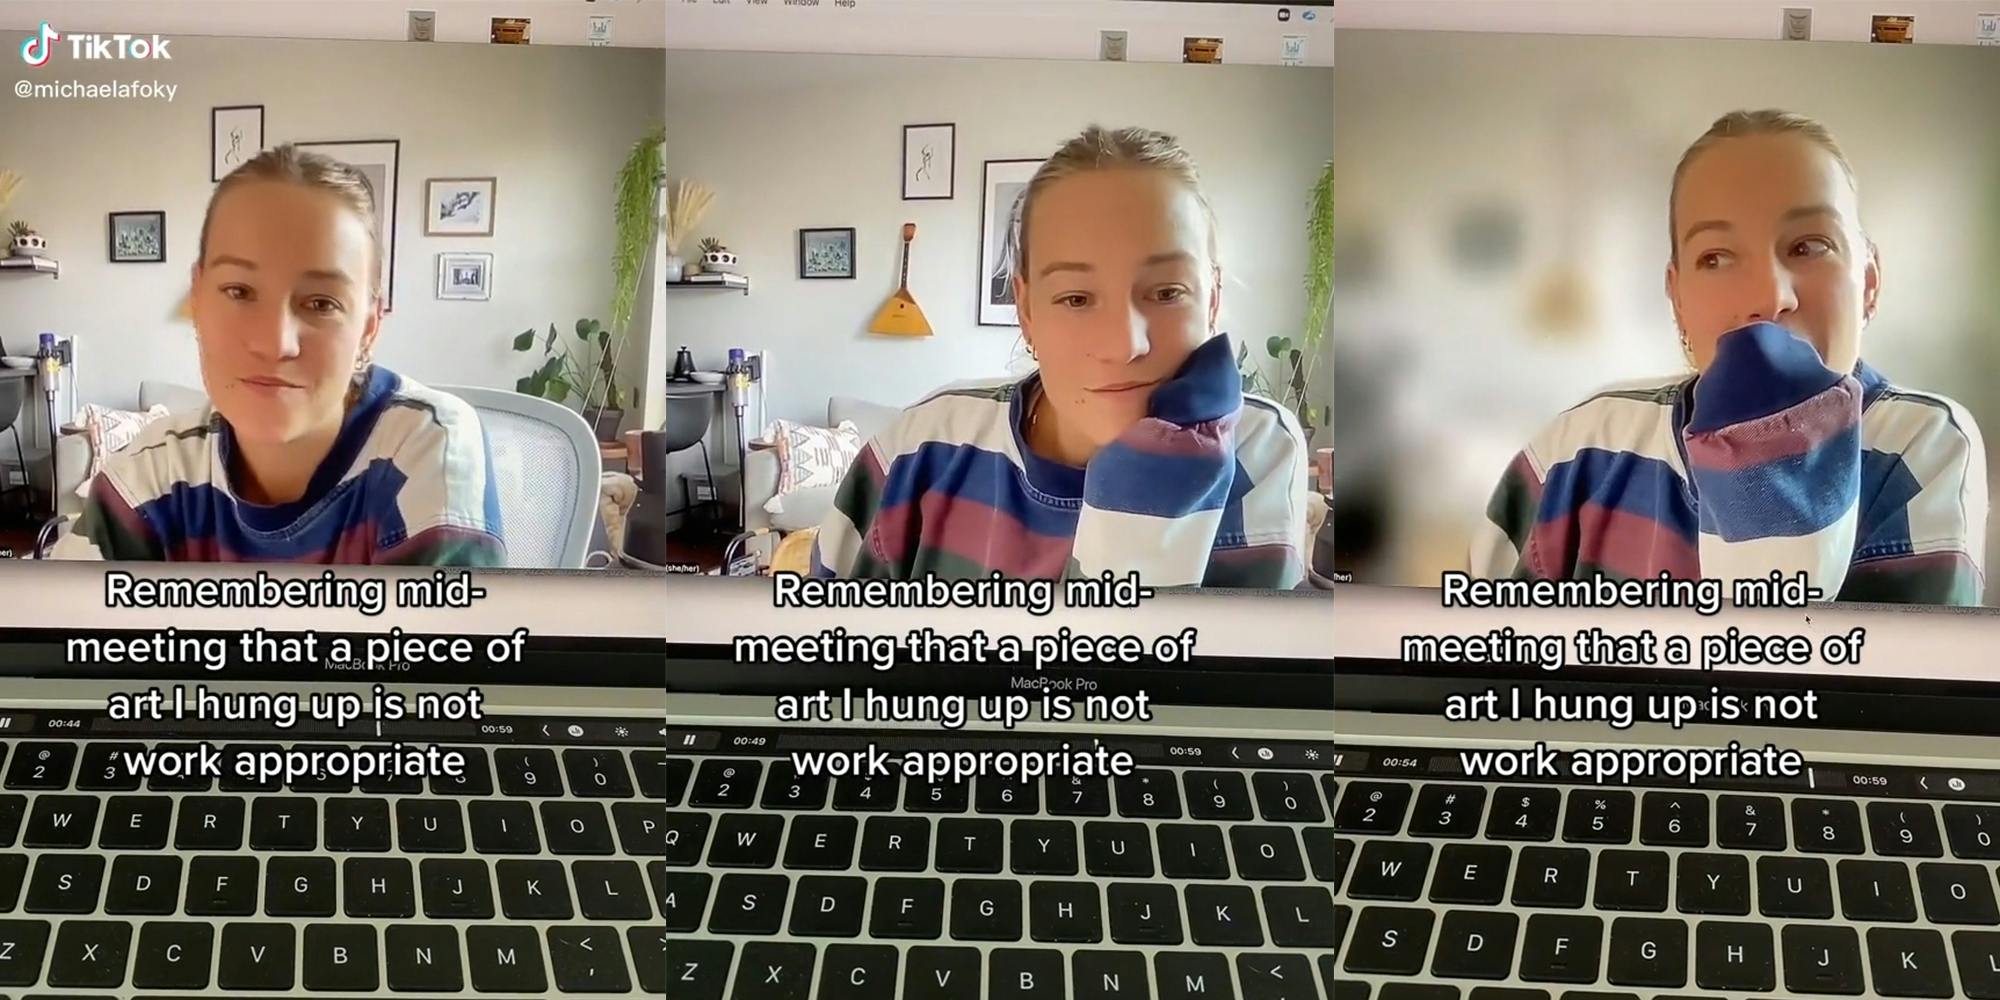 ‘It’s just enough inappropriate that my HR team wouldn’t appreciate it’: Worker notices that NSFW art on her wall is visible via Zoom in viral video